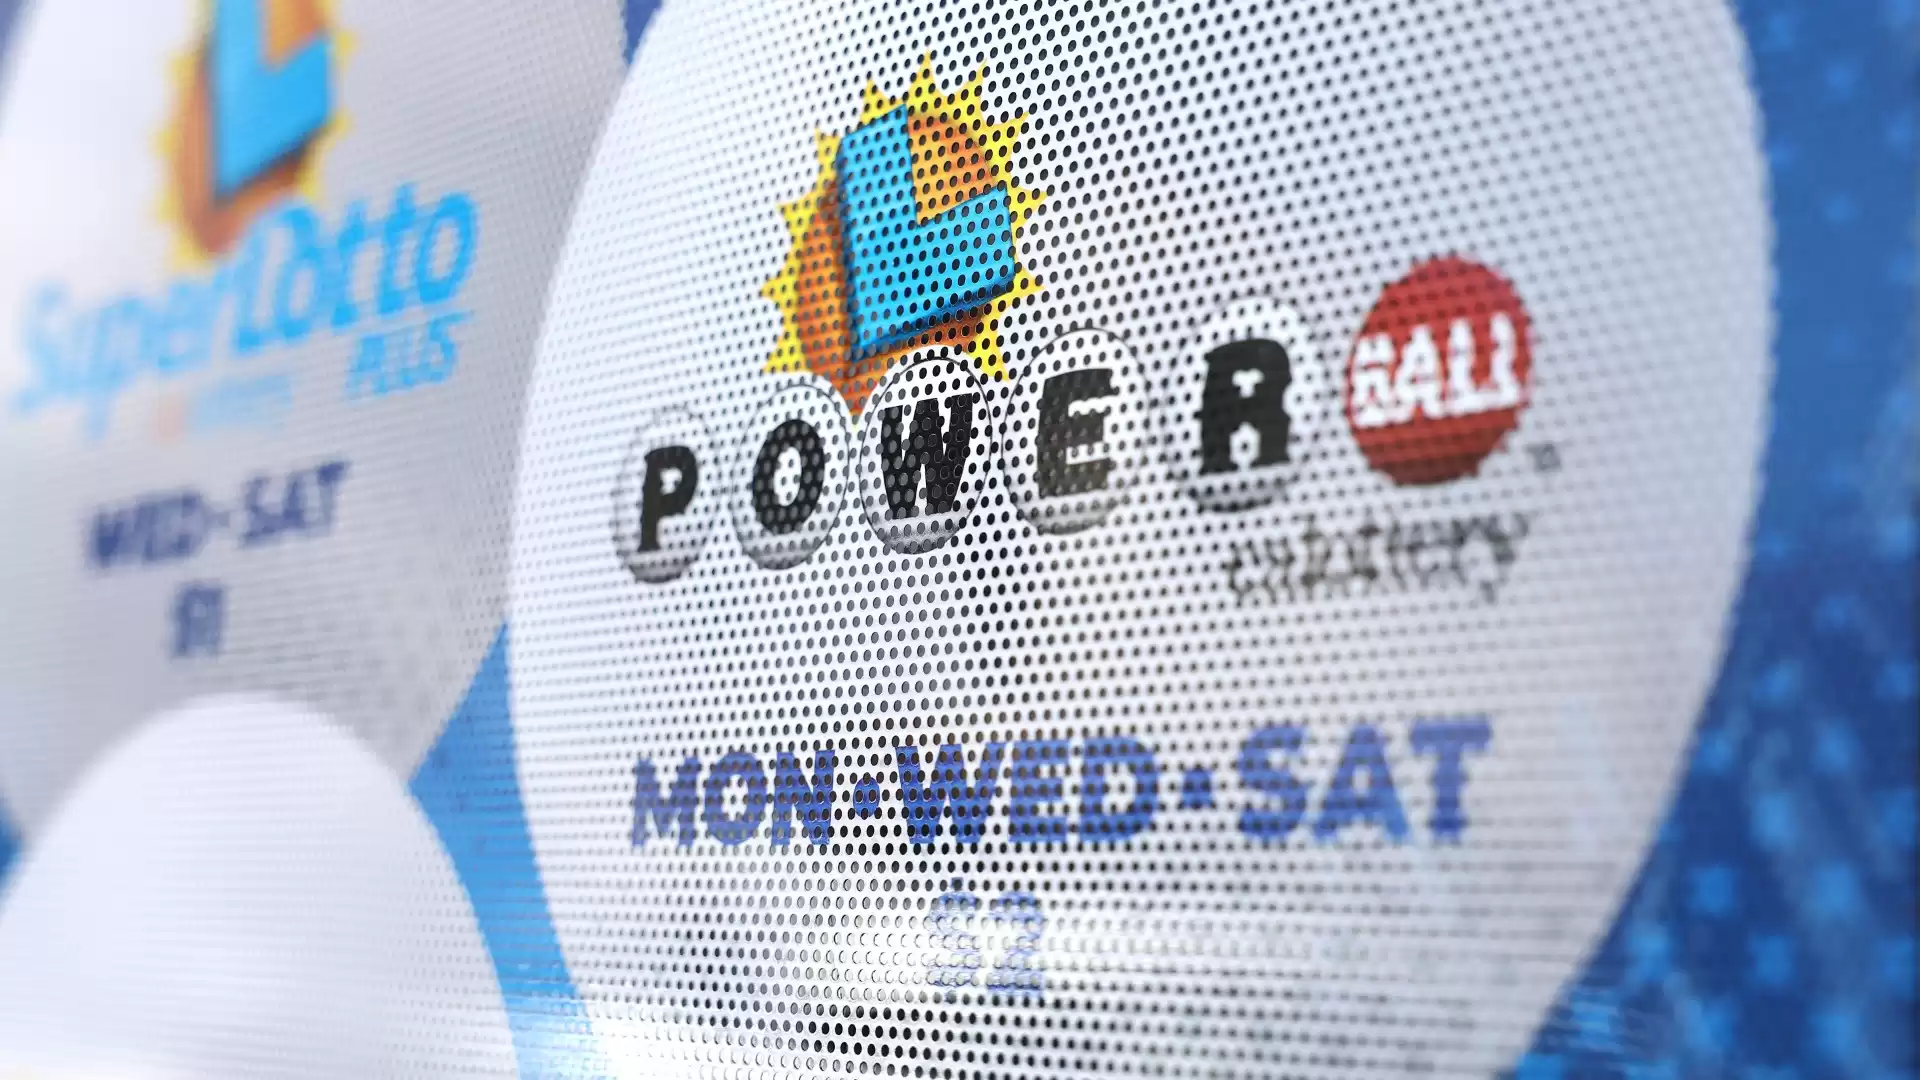 Warning: Powerball jackpot nearing expiration; check your numbers for unclaimed $1 million prize.